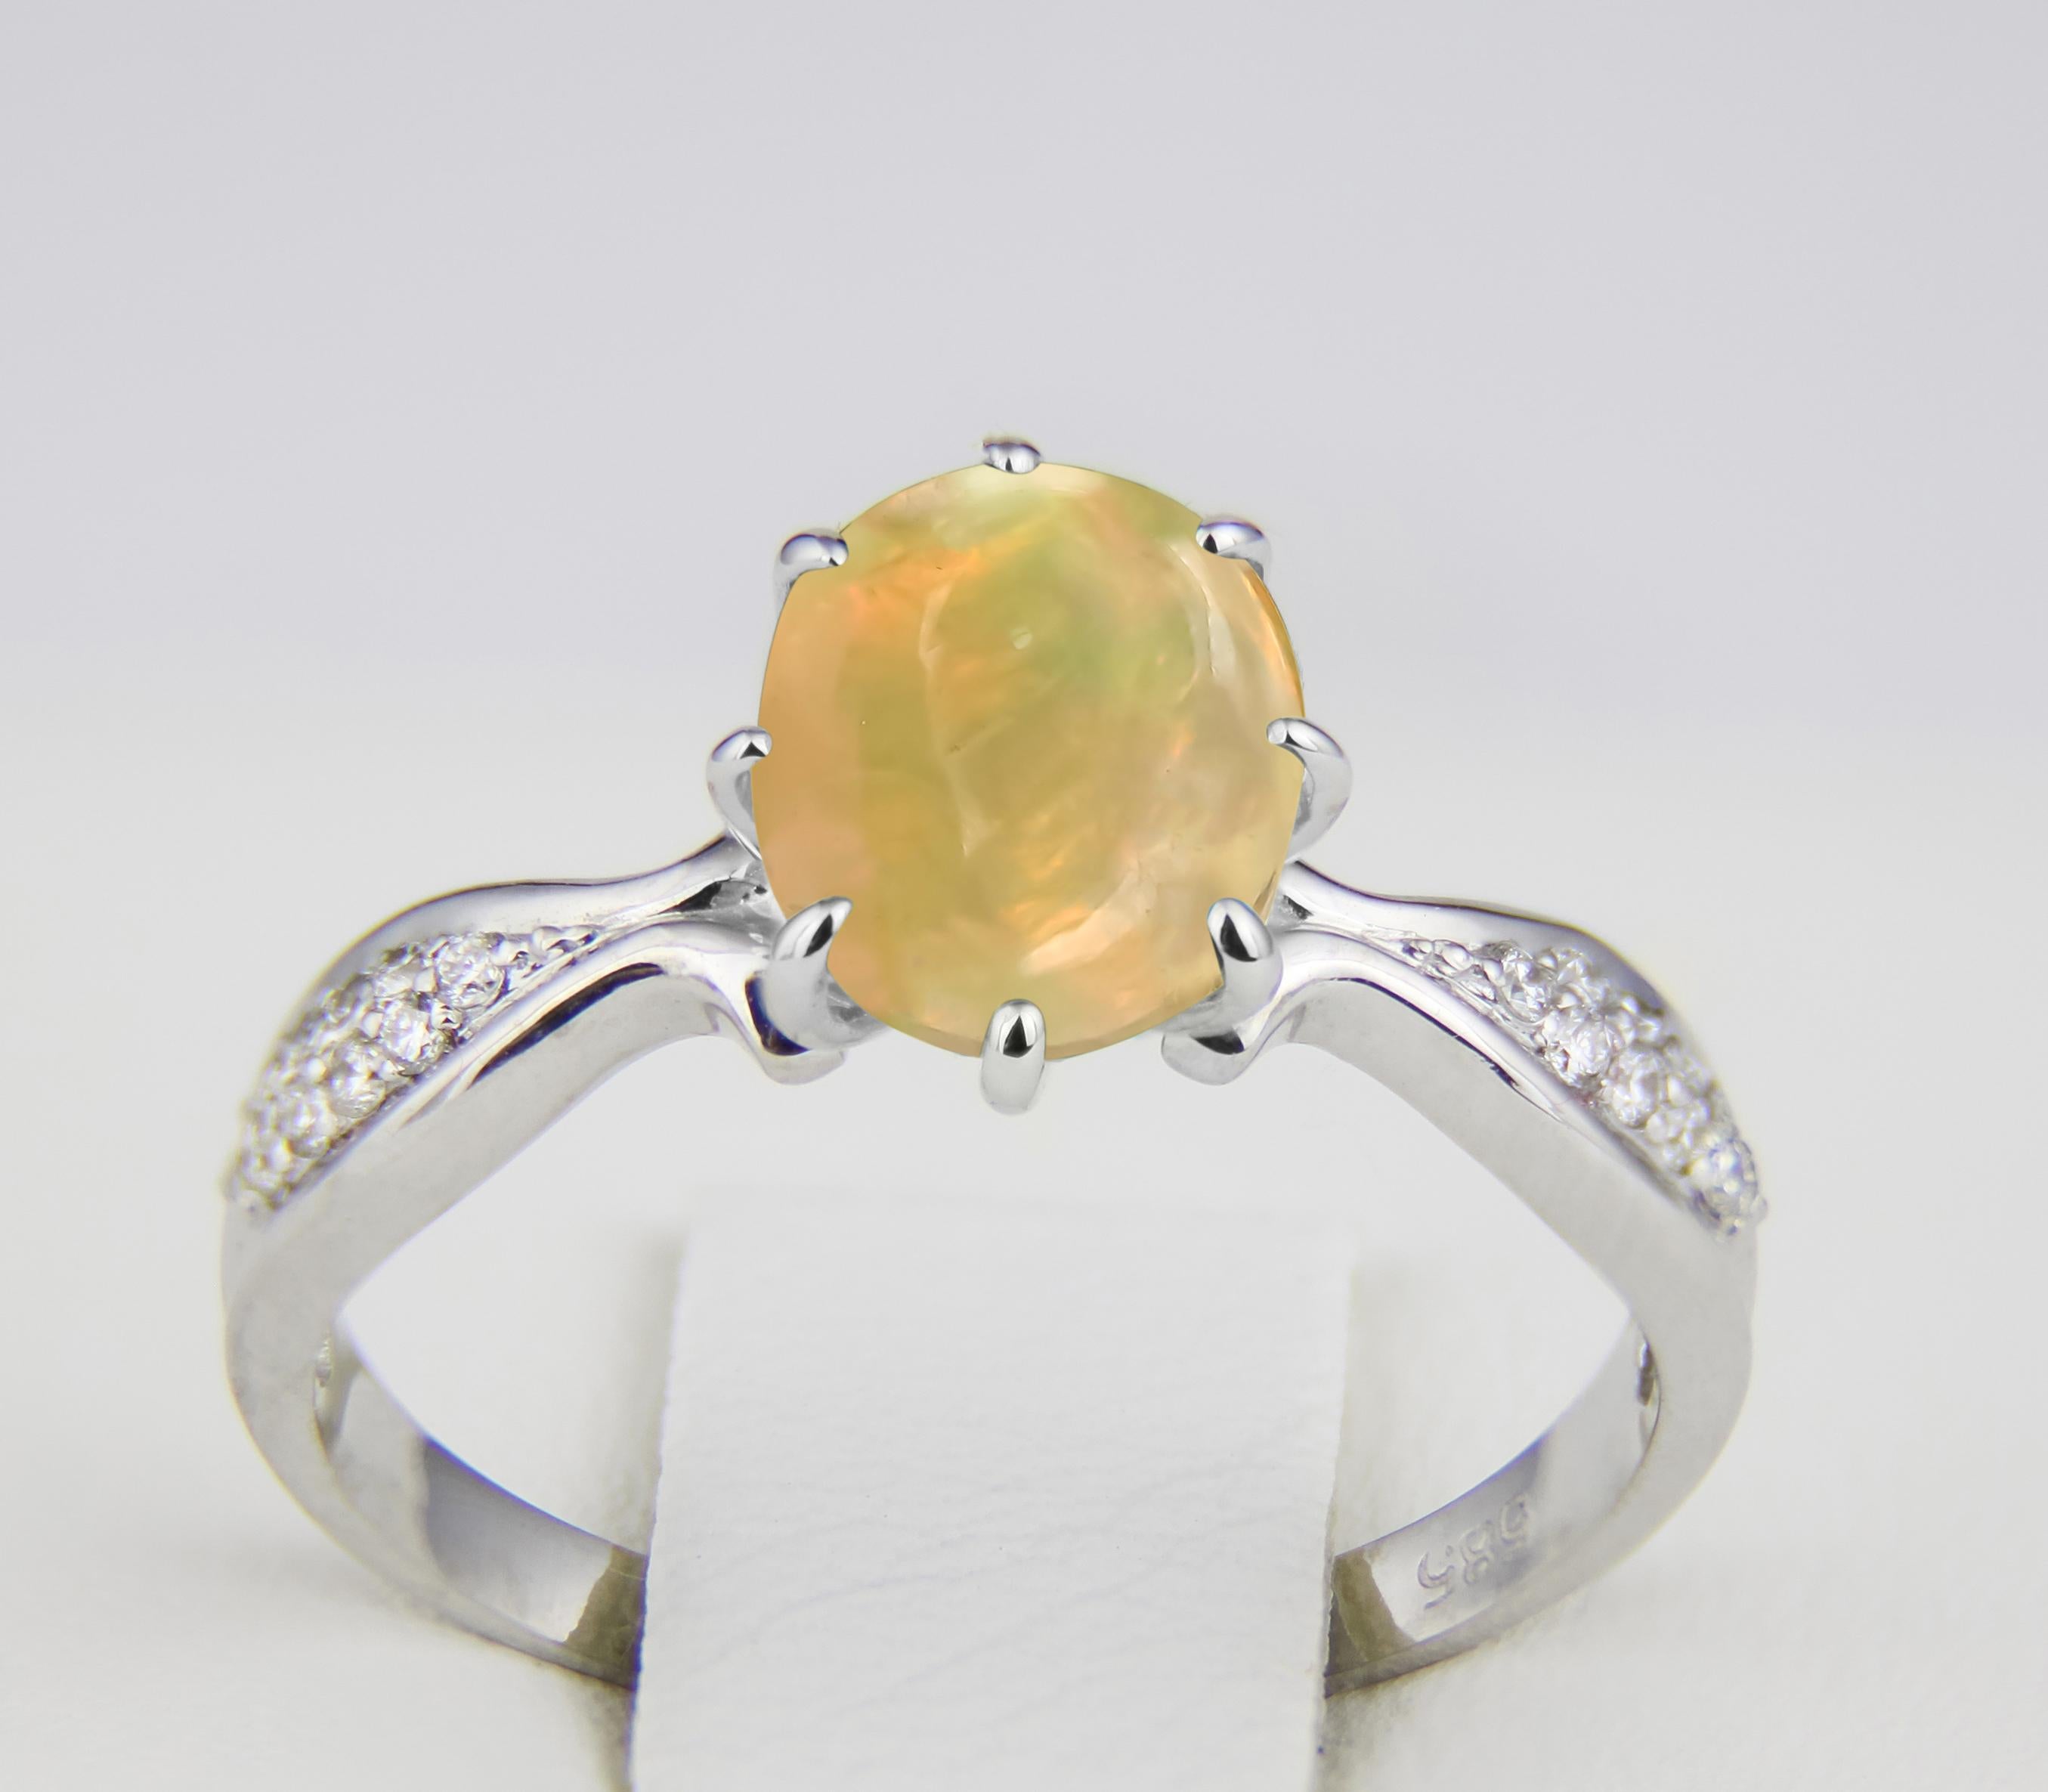 Modern Opal 14k Gold Ring, Cabochon Opal Ring. Opal Gold Ring. Opal Vintage Ring For Sale